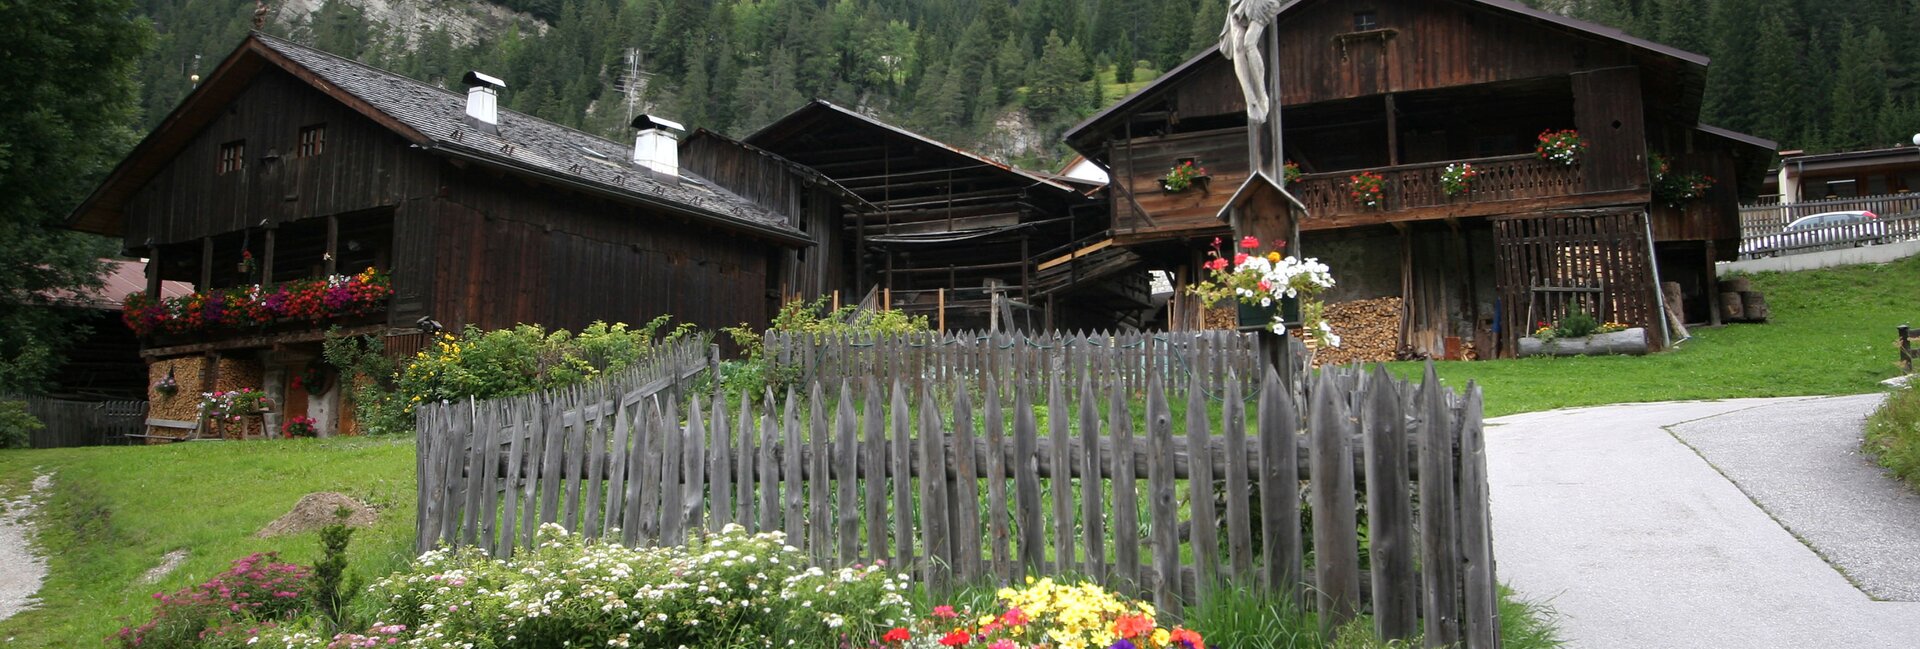 Traditional Trentino Trunks - Typical Wooden Homes